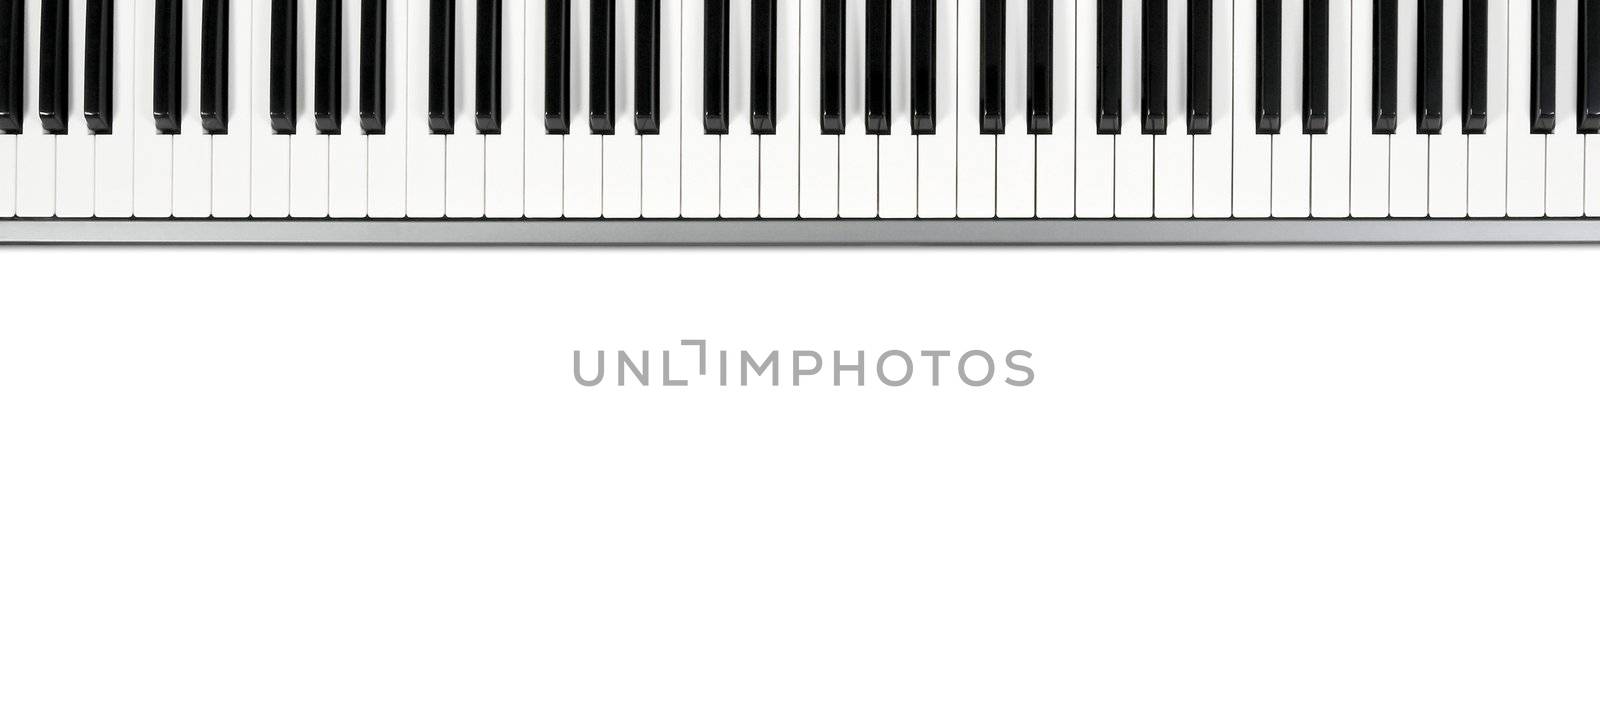 piano keyboard isolated on a white background